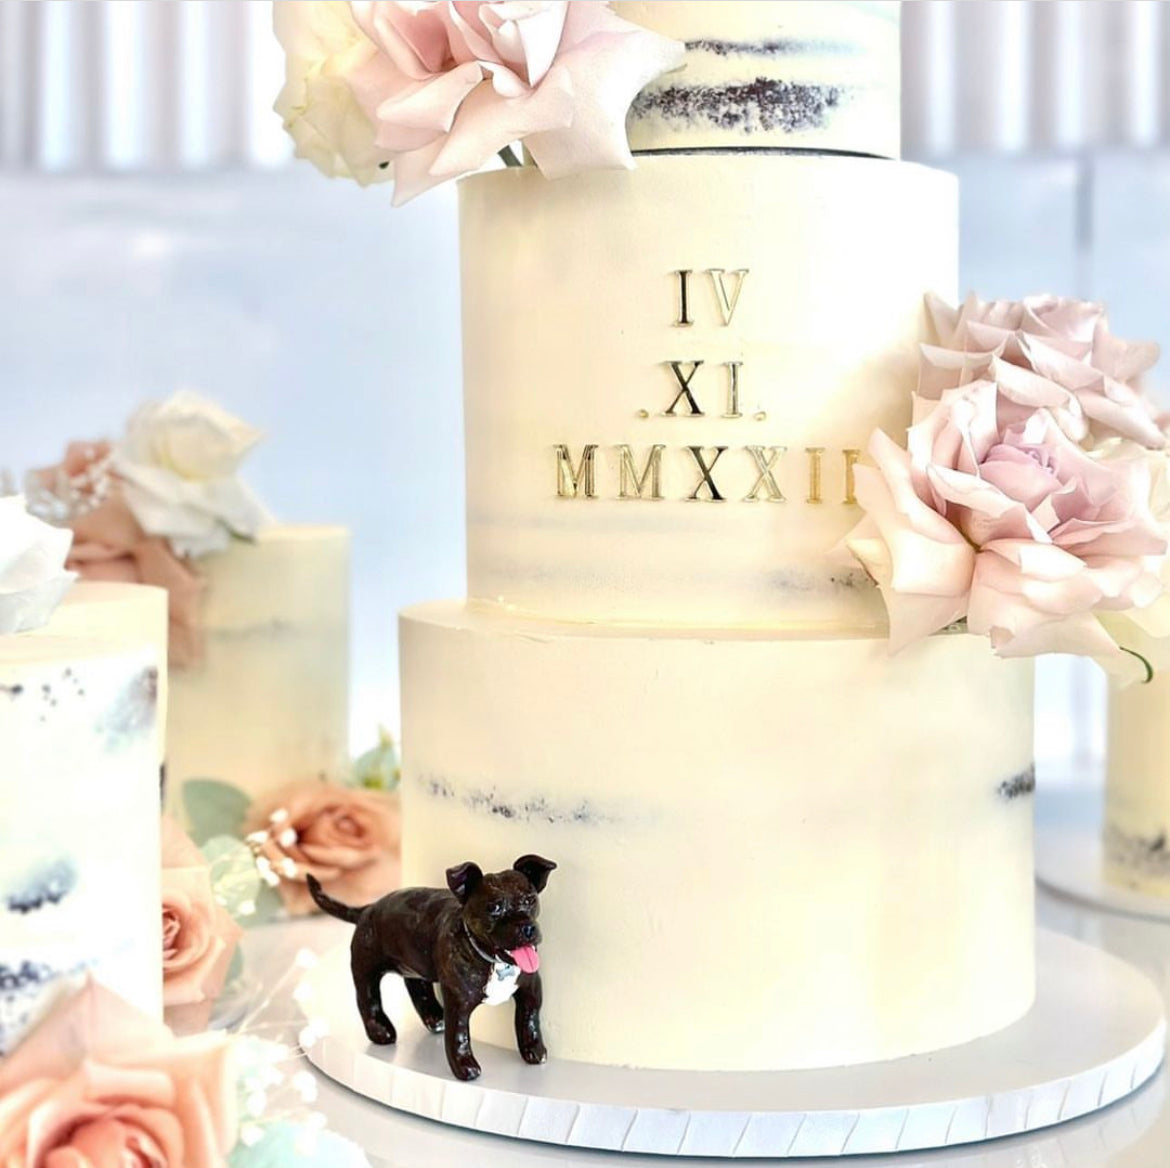 3 tier white white wedding cake with pink roses, surrounded by mini matching cakes with a handmade dog cake topper standing beside the main cake.